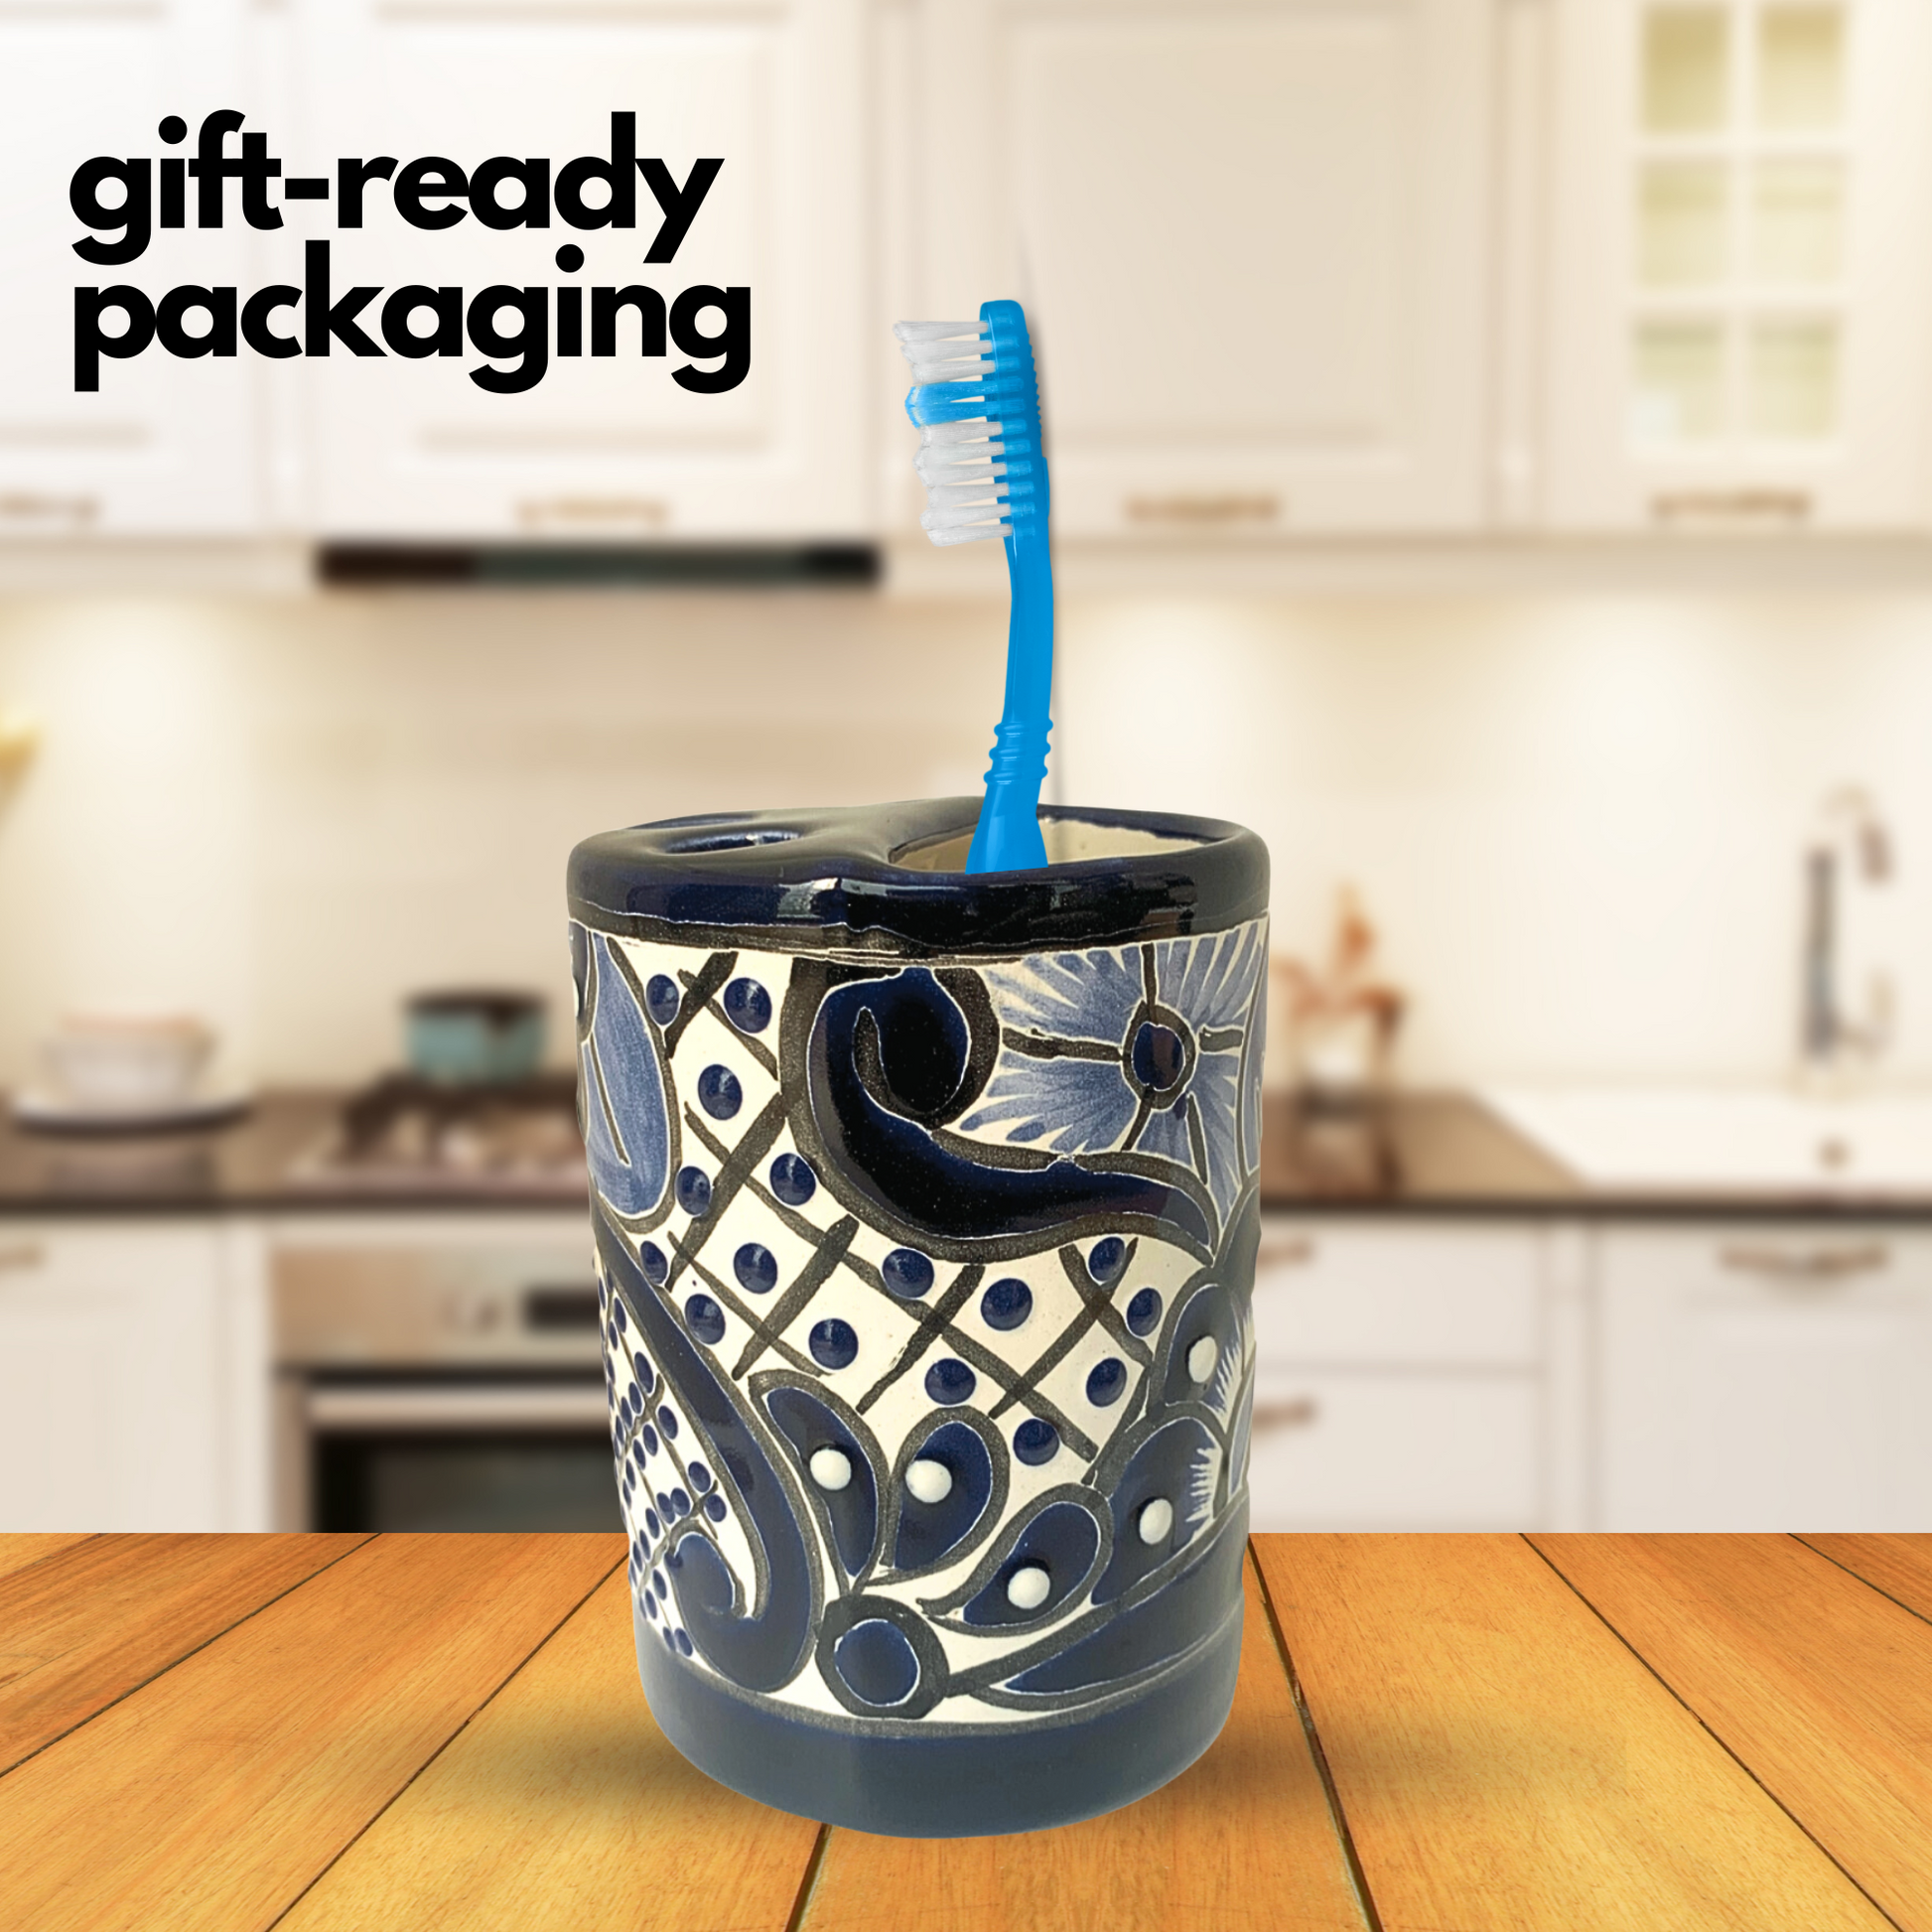 gift ready packaging Hand-painted Talavera Toothbrush Holder by Casa Fiesta Designs, offers compact storage and adds charm to your bathroom.